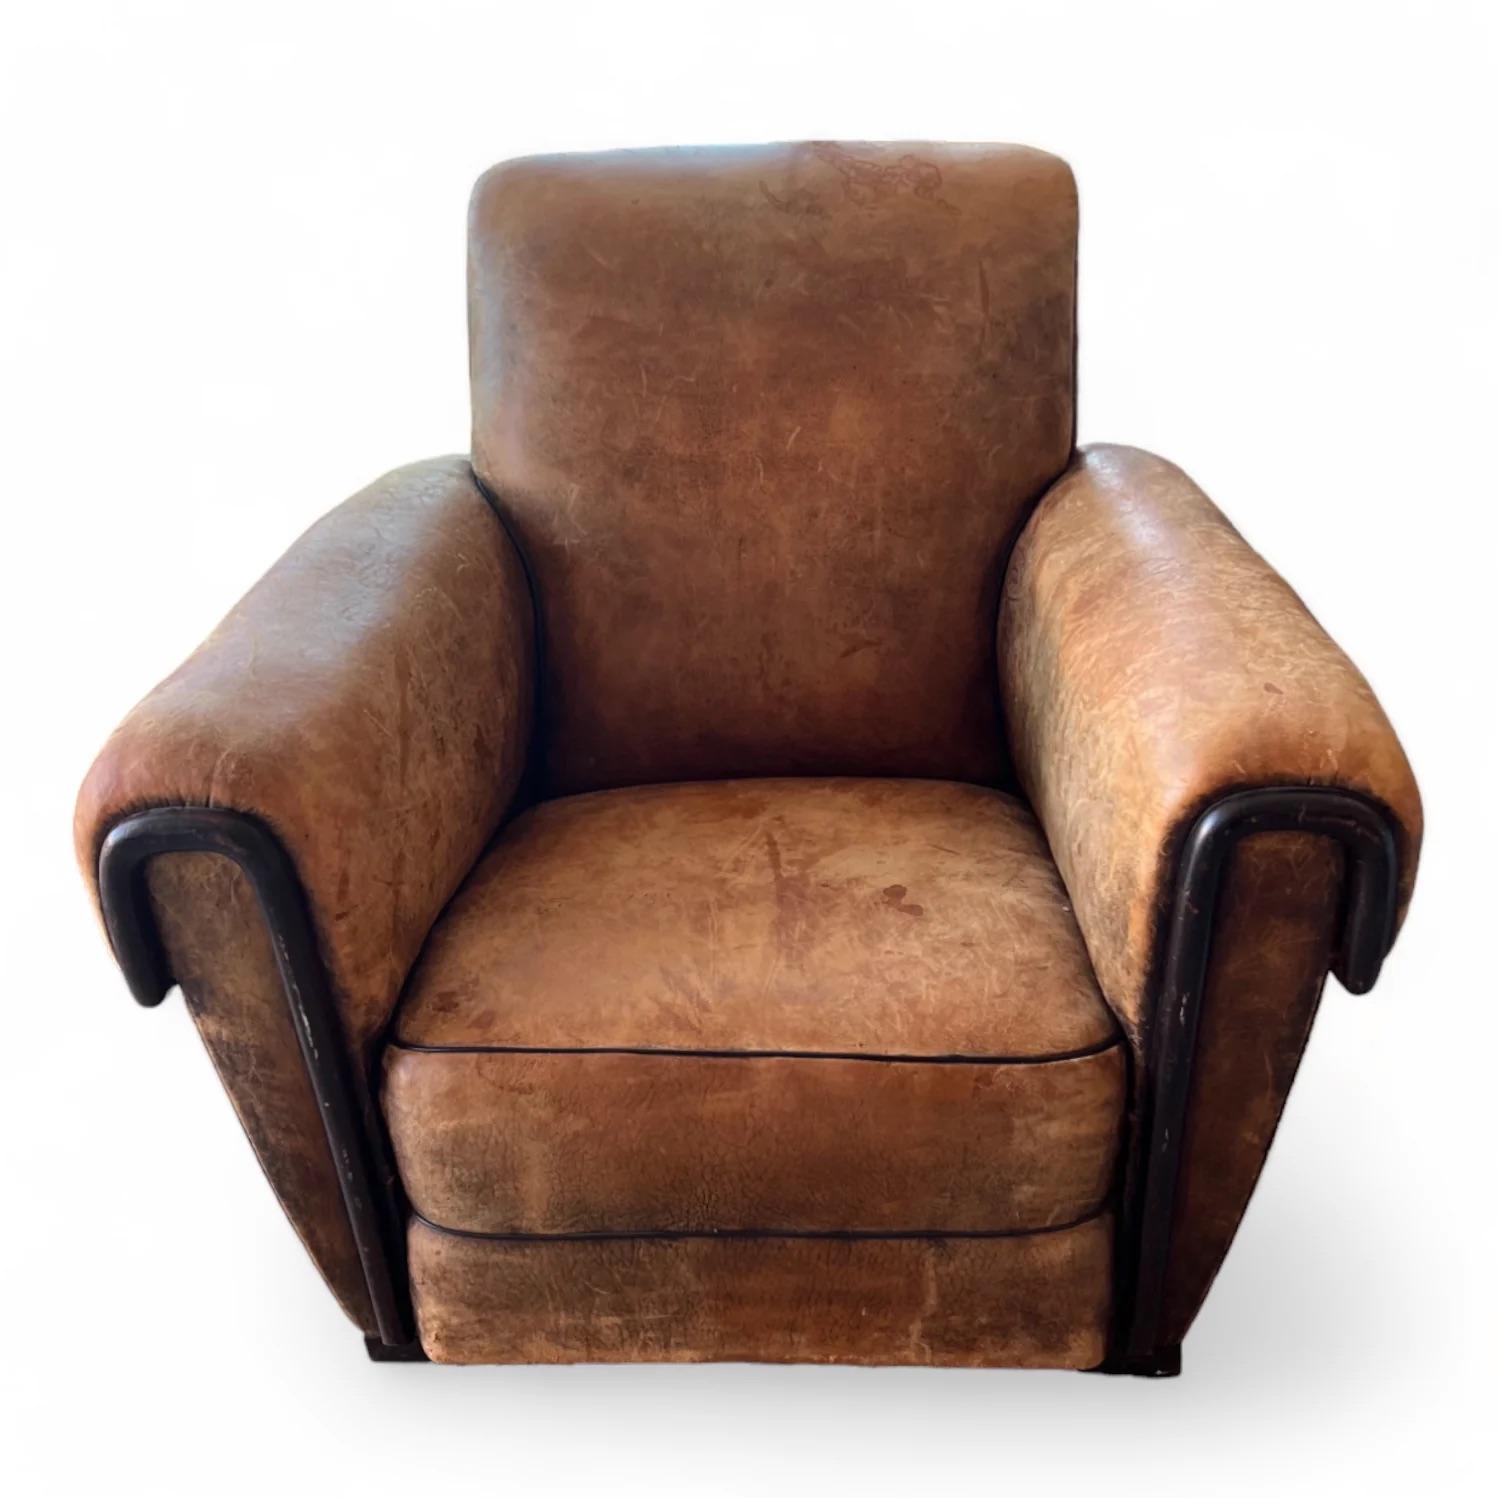 Our incredible leather chairs have been thoughtfully selected for their craftsmanship and unique character that will compliment any space. With vintage items there may be some minor imperfections adding to its charm.